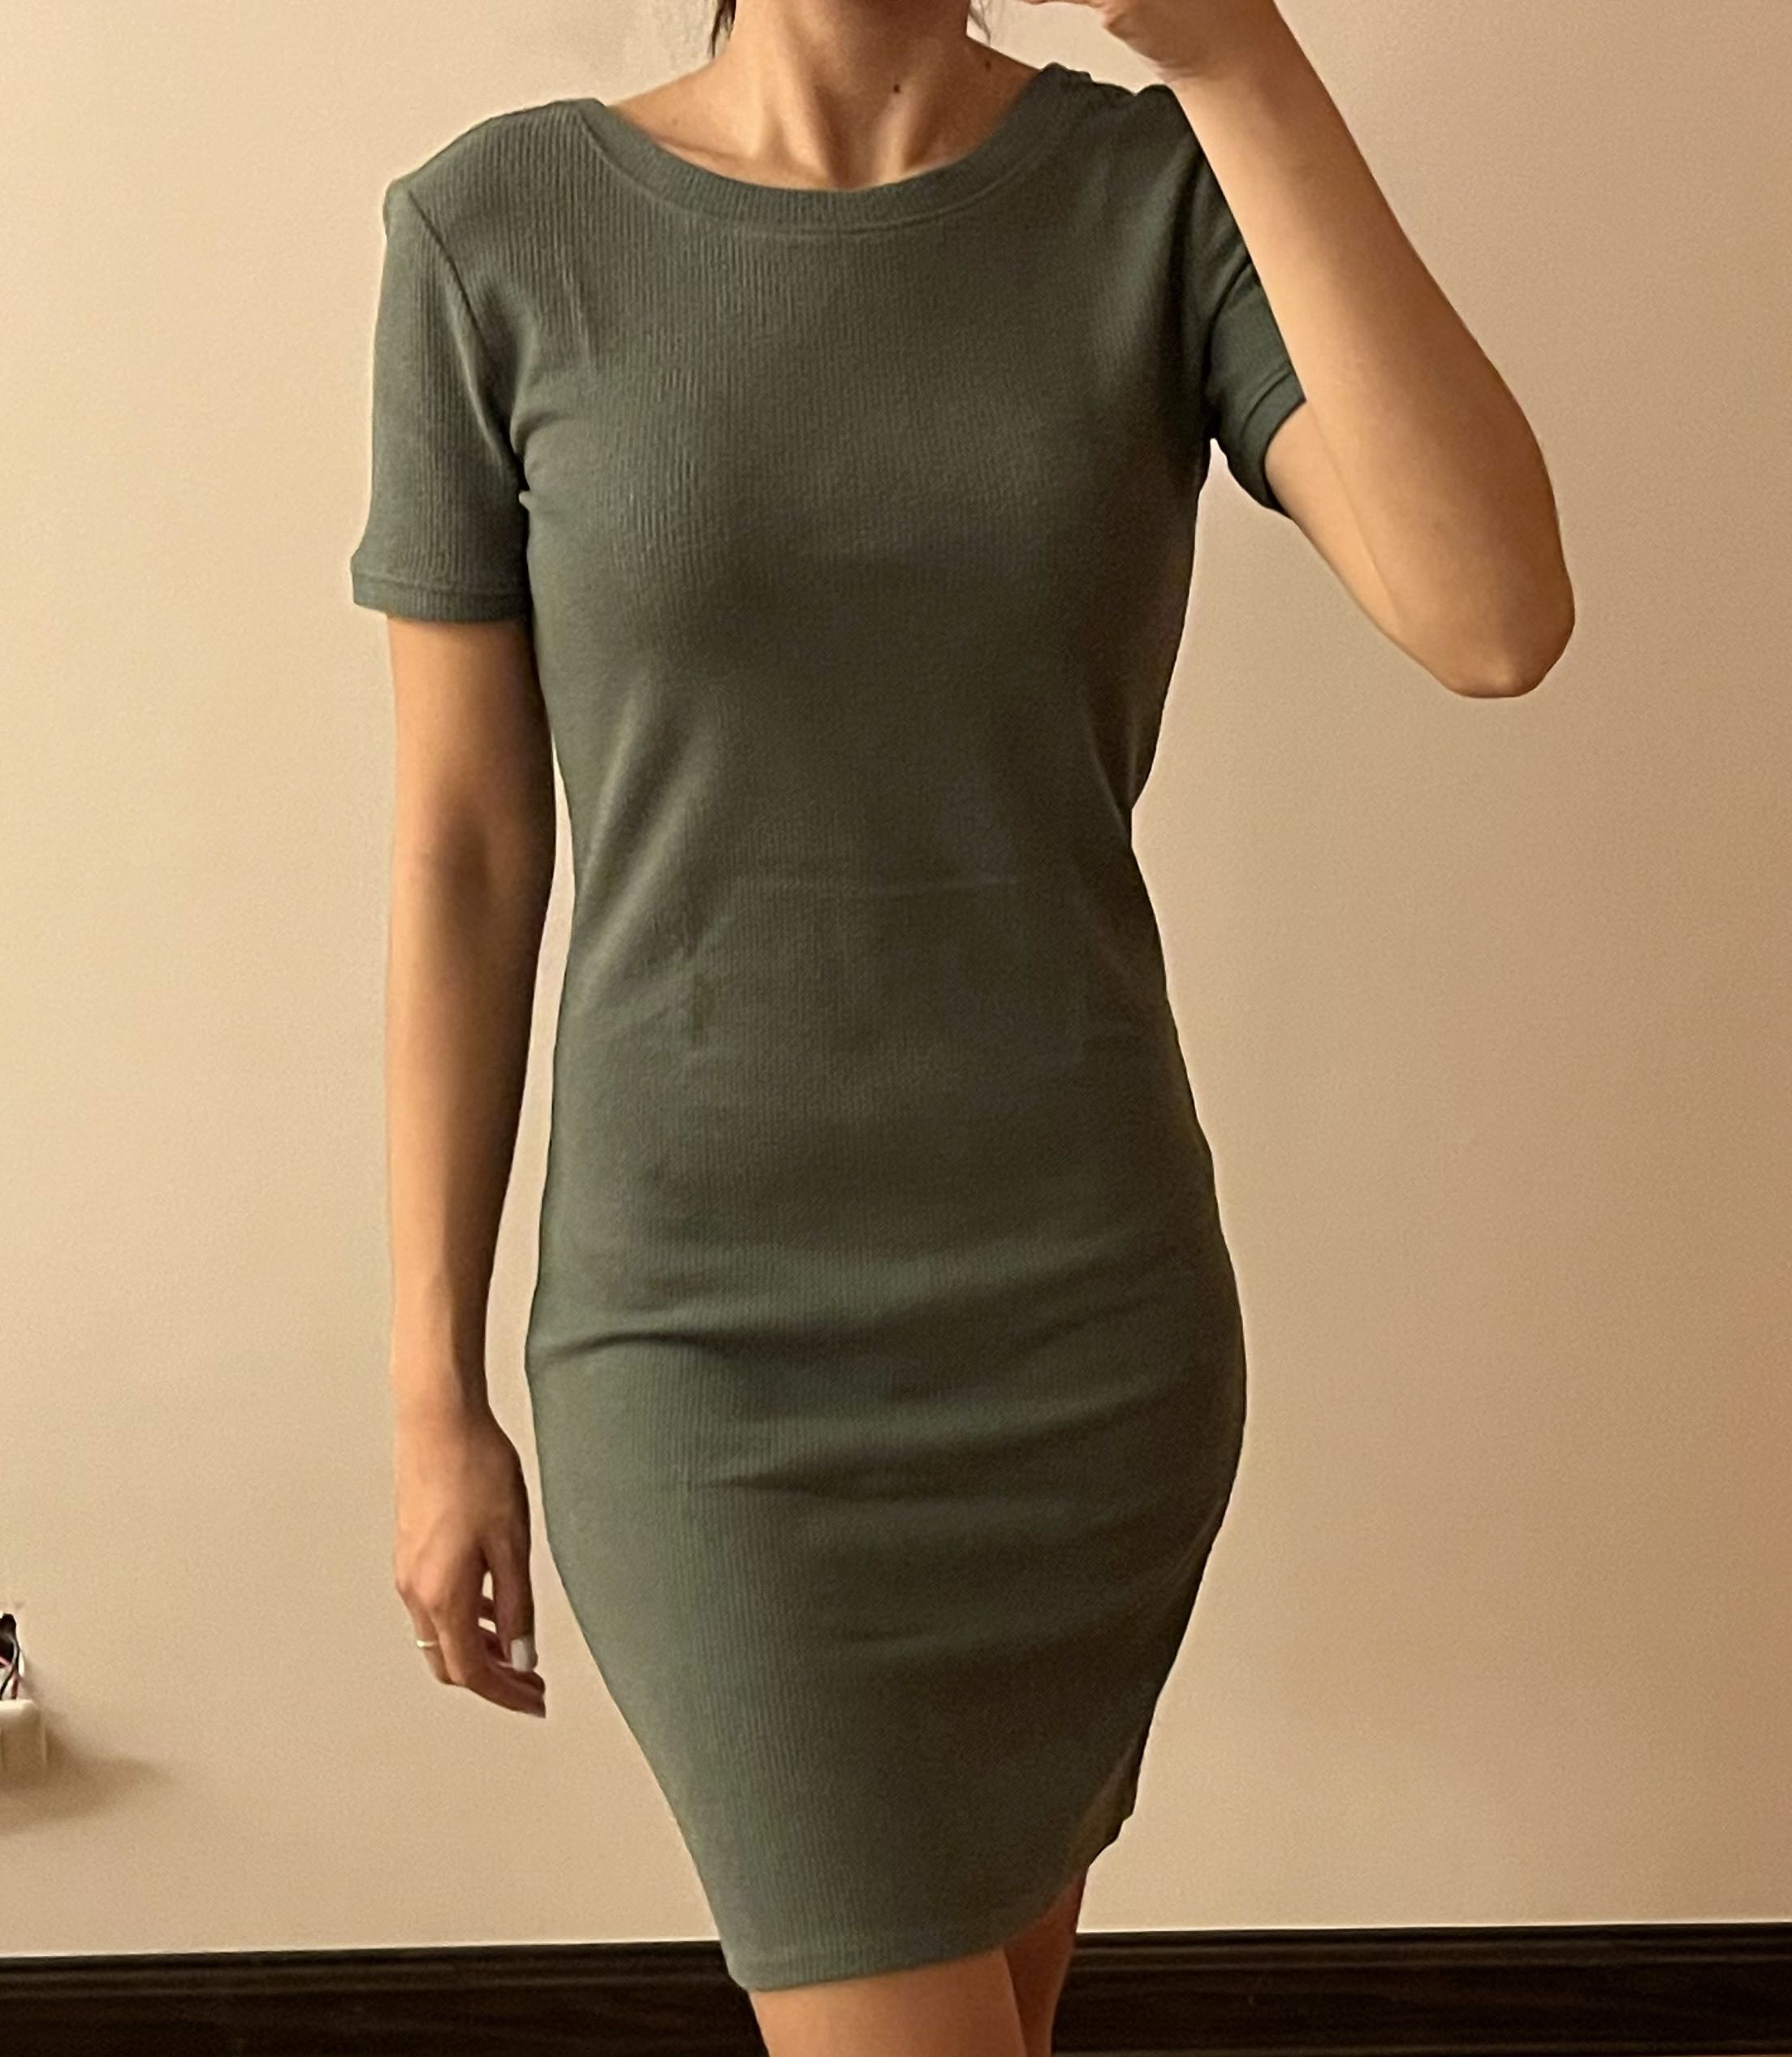 F21 Army Green Bodycon Dress Womens Fashion Dresses And Sets Dresses